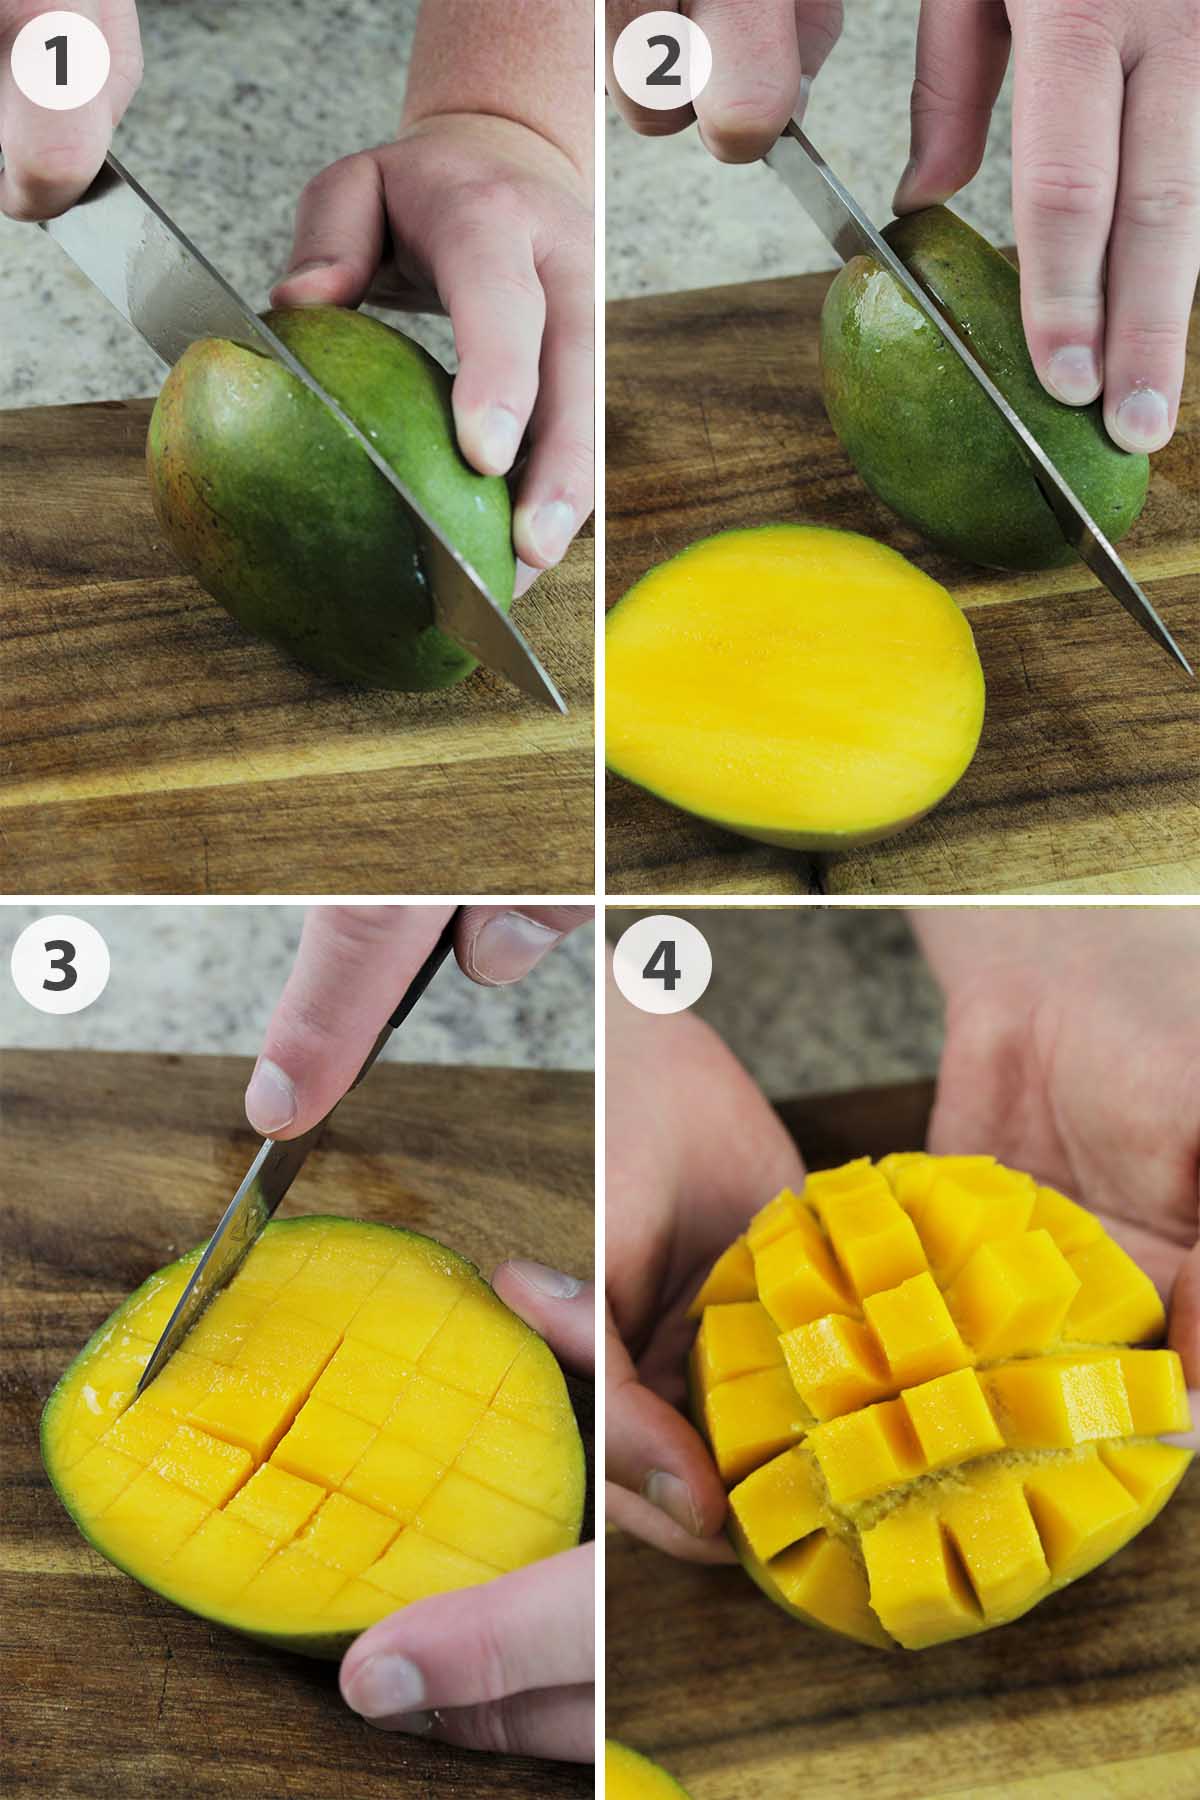 four numbered photos showing how to cut a mango.